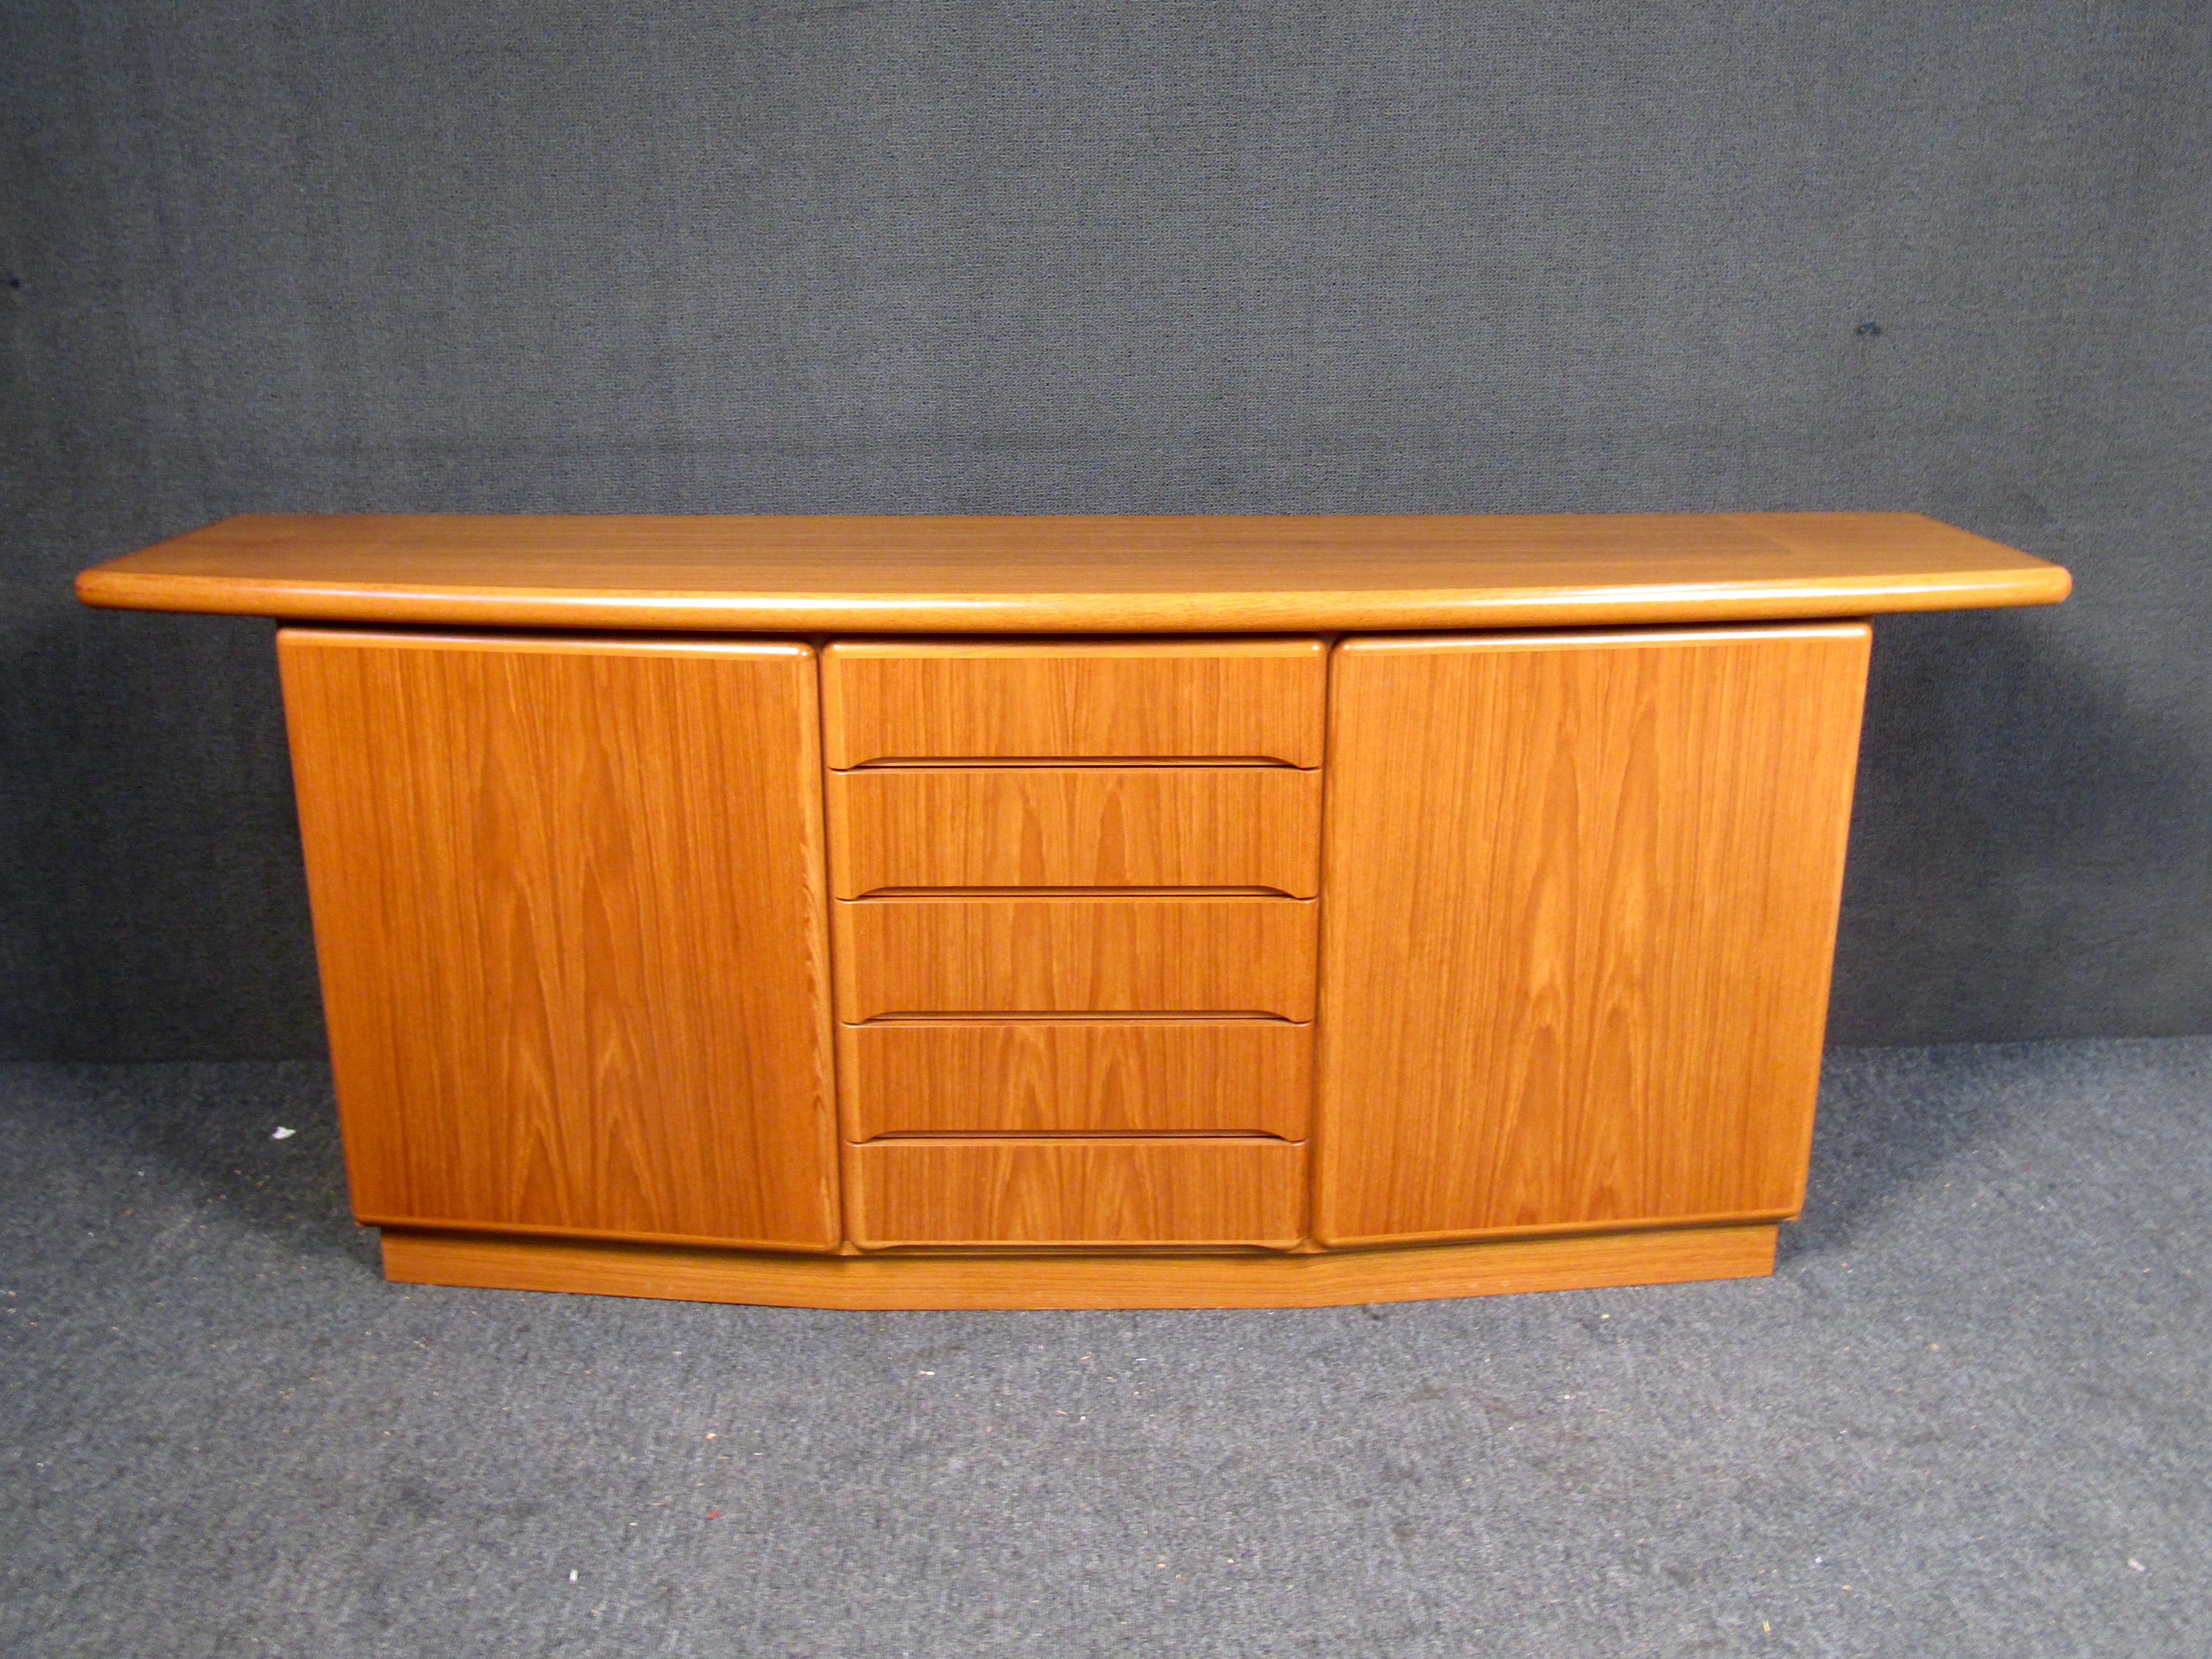 This beautiful teak credenza features a warm finish with five main drawers and two storage areas to the right and left. Manufactured by Skovby this credenza will make a great addition to your living space. Please confirm item location (NJ or NY).